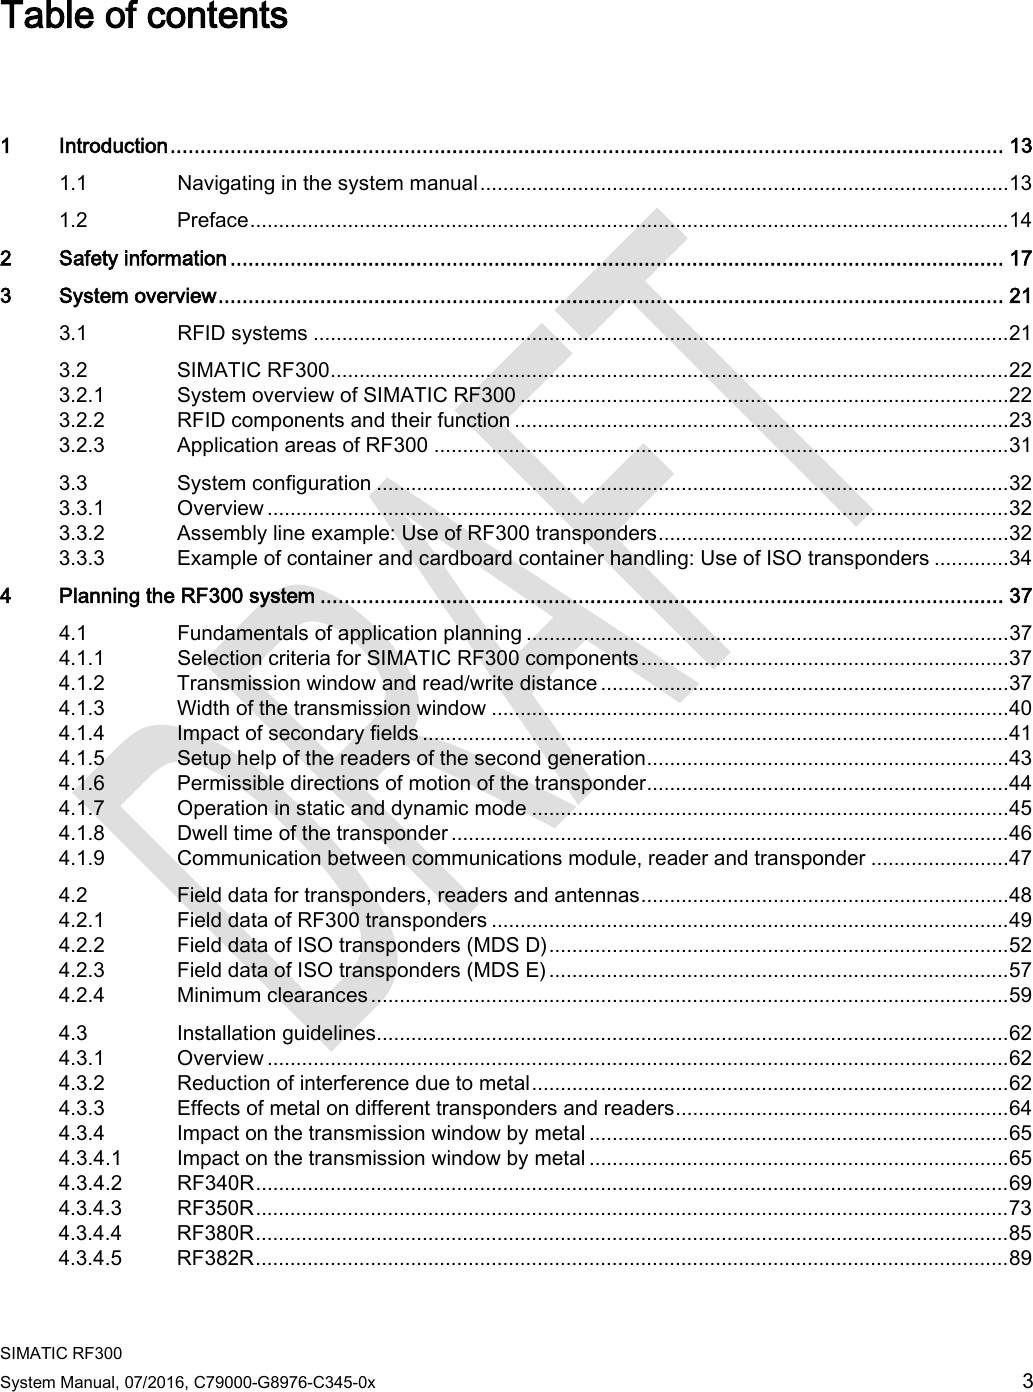  SIMATIC RF300 System Manual, 07/2016, C79000-G8976-C345-0x 3 Table of contents   1  Introduction ........................................................................................................................................... 13 1.1 Navigating in the system manual ............................................................................................ 13 1.2 Preface .................................................................................................................................... 14 2  Safety information ................................................................................................................................. 17 3  System overview ................................................................................................................................... 21 3.1 RFID systems ......................................................................................................................... 21 3.2 SIMATIC RF300 ...................................................................................................................... 22 3.2.1 System overview of SIMATIC RF300 ..................................................................................... 22 3.2.2 RFID components and their function ...................................................................................... 23 3.2.3 Application areas of RF300 .................................................................................................... 31 3.3 System configuration .............................................................................................................. 32 3.3.1 Overview ................................................................................................................................. 32 3.3.2 Assembly line example: Use of RF300 transponders ............................................................. 32 3.3.3 Example of container and cardboard container handling: Use of ISO transponders ............. 34 4  Planning the RF300 system .................................................................................................................. 37 4.1 Fundamentals of application planning .................................................................................... 37 4.1.1 Selection criteria for SIMATIC RF300 components ................................................................ 37 4.1.2 Transmission window and read/write distance ....................................................................... 37 4.1.3 Width of the transmission window .......................................................................................... 40 4.1.4 Impact of secondary fields ...................................................................................................... 41 4.1.5 Setup help of the readers of the second generation ............................................................... 43 4.1.6 Permissible directions of motion of the transponder ............................................................... 44 4.1.7 Operation in static and dynamic mode ................................................................................... 45 4.1.8 Dwell time of the transponder ................................................................................................. 46 4.1.9  Communication between communications module, reader and transponder ........................ 47 4.2 Field data for transponders, readers and antennas ................................................................ 48 4.2.1 Field data of RF300 transponders .......................................................................................... 49 4.2.2 Field data of ISO transponders (MDS D) ................................................................................ 52 4.2.3 Field data of ISO transponders (MDS E) ................................................................................ 57 4.2.4 Minimum clearances ............................................................................................................... 59 4.3 Installation guidelines.............................................................................................................. 62 4.3.1 Overview ................................................................................................................................. 62 4.3.2  Reduction of interference due to metal ................................................................................... 62 4.3.3 Effects of metal on different transponders and readers .......................................................... 64 4.3.4 Impact on the transmission window by metal ......................................................................... 65 4.3.4.1 Impact on the transmission window by metal ......................................................................... 65 4.3.4.2 RF340R ................................................................................................................................... 69 4.3.4.3 RF350R ................................................................................................................................... 73 4.3.4.4 RF380R ................................................................................................................................... 85 4.3.4.5 RF382R ................................................................................................................................... 89 